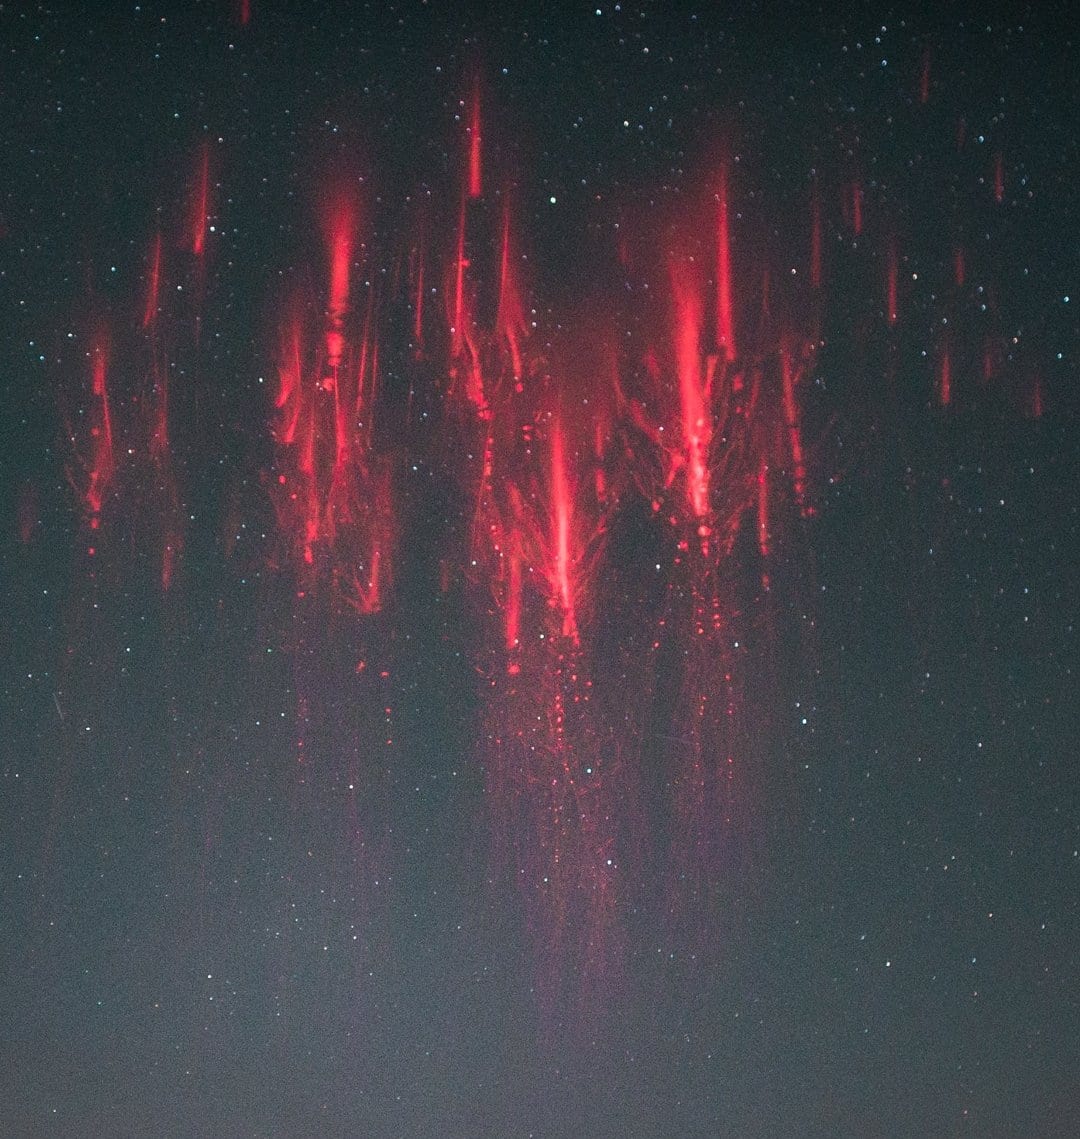 "Red Sprites" are large-scale electrical discharges that occur high above thunderstorm clouds, or cumulonimbus, giving rise to a quite varied range of visual shapes flickering in the night sky.